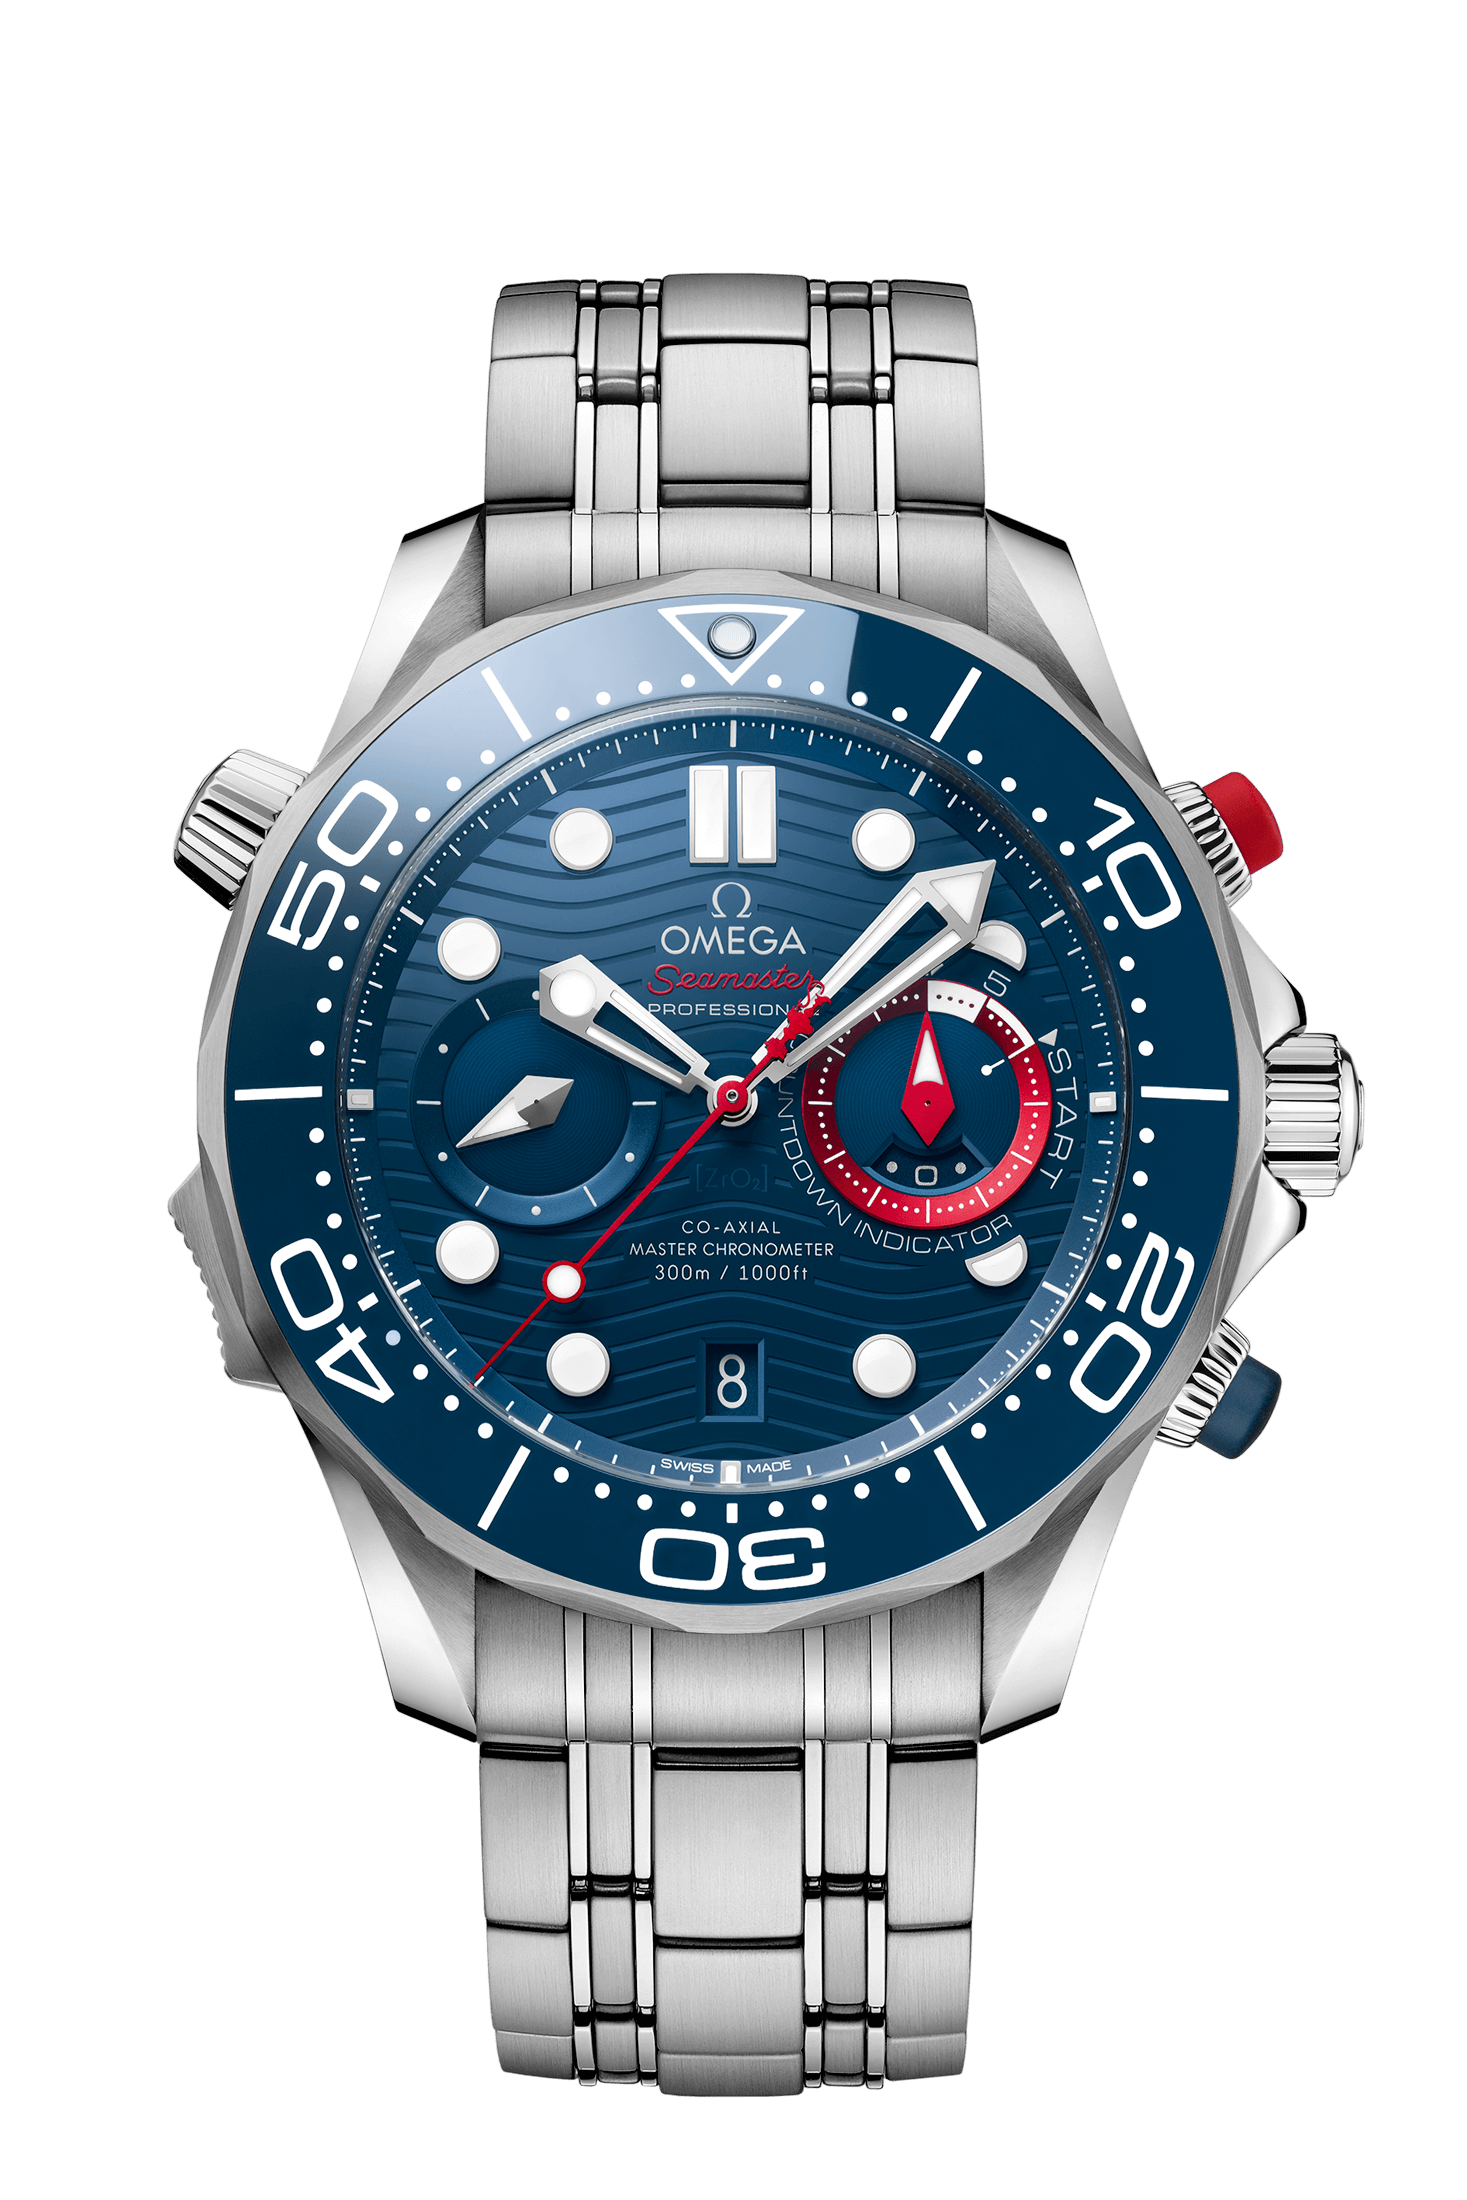 DIVER 300M- CO-AXIAL MASTER CHRONOMETER CHRONOGRAPH 44 MM  Seamaster Référence :  210.30.44.51.03.002 -1